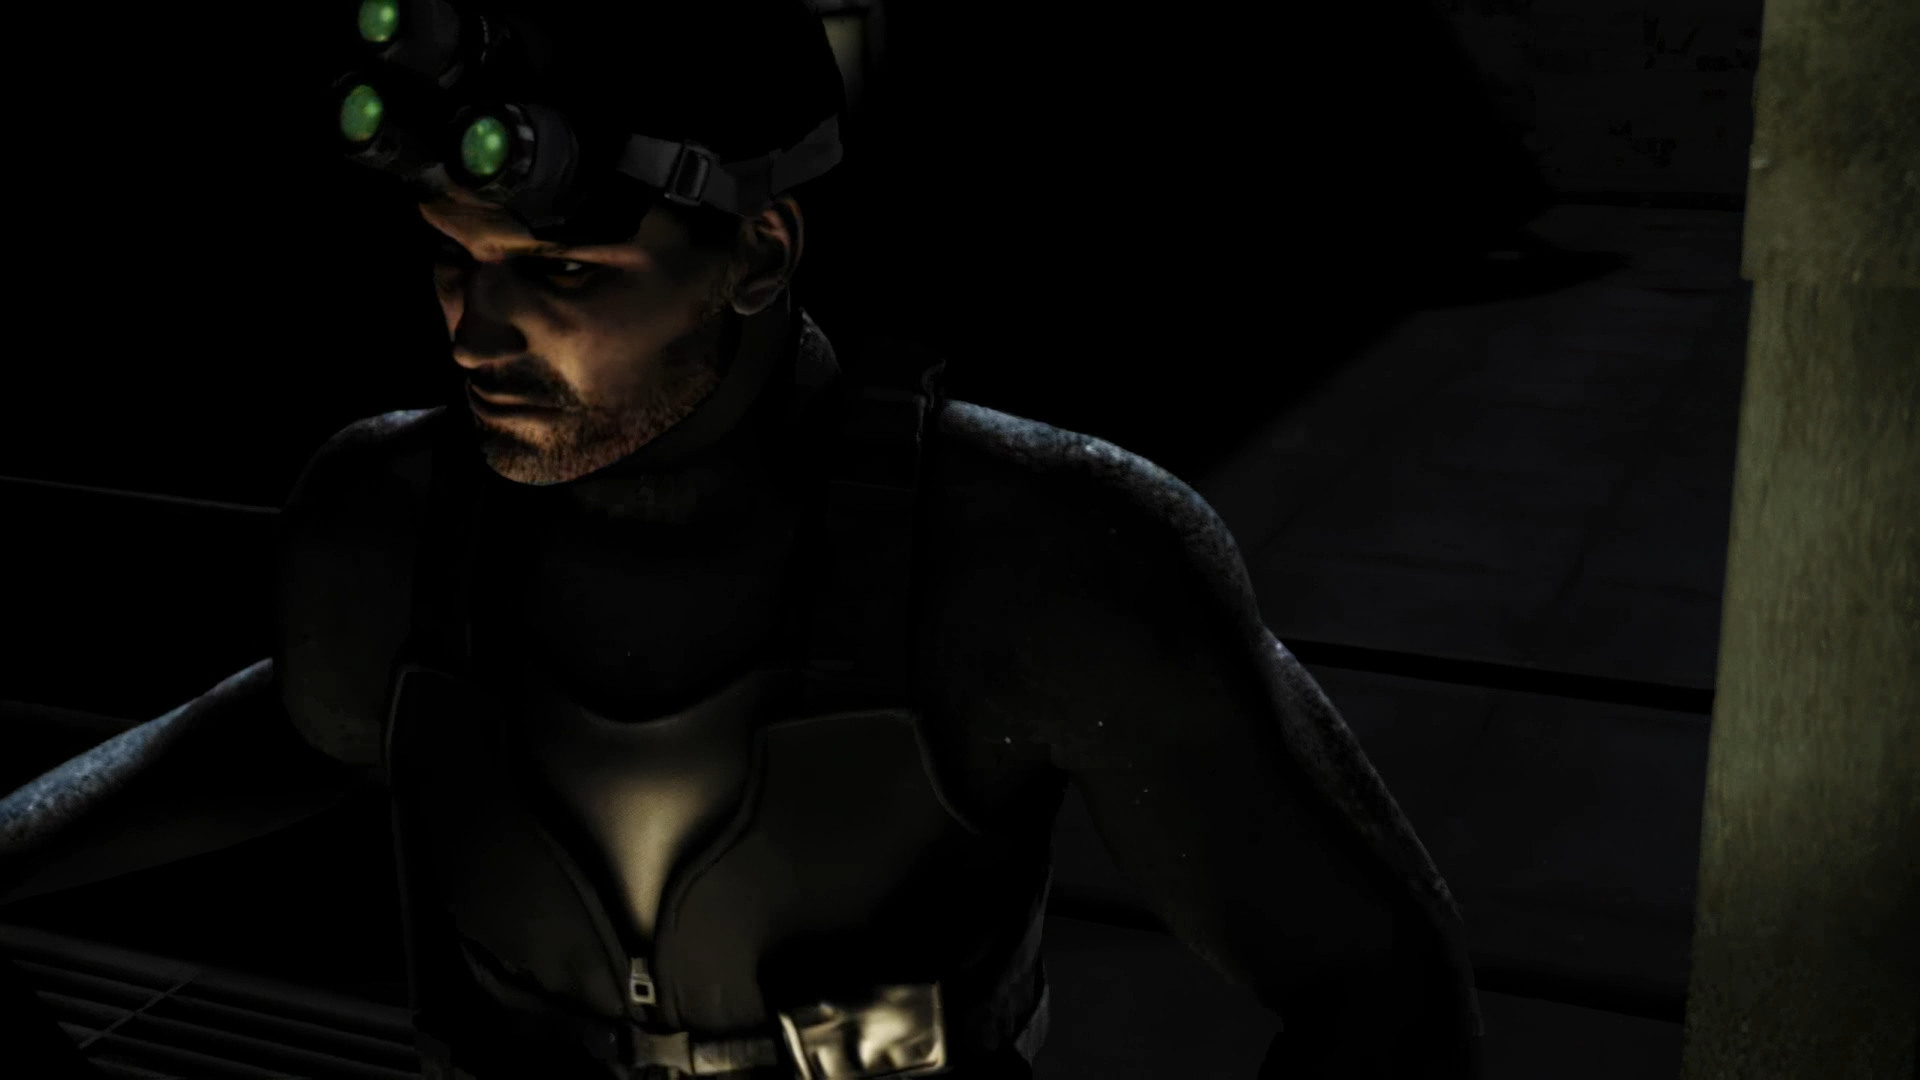 Tom Clancy's Splinter Cell: Chaos Theory - PCGamingWiki PCGW - bugs, fixes,  crashes, mods, guides and improvements for every PC game